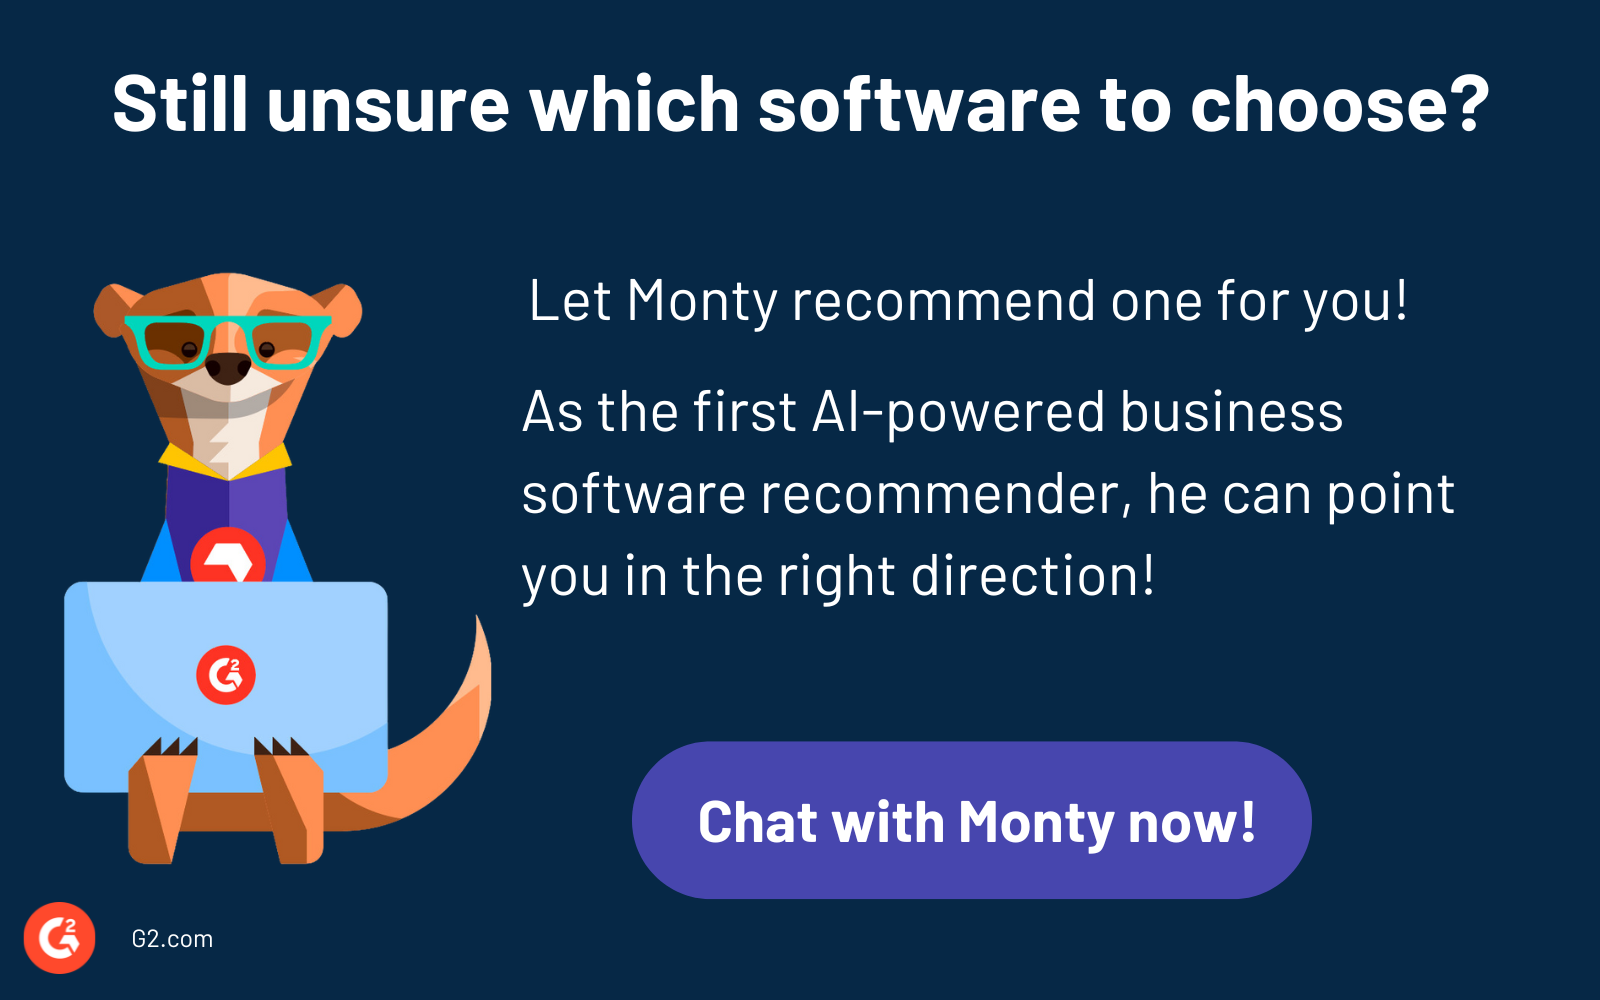 Chat with Monty